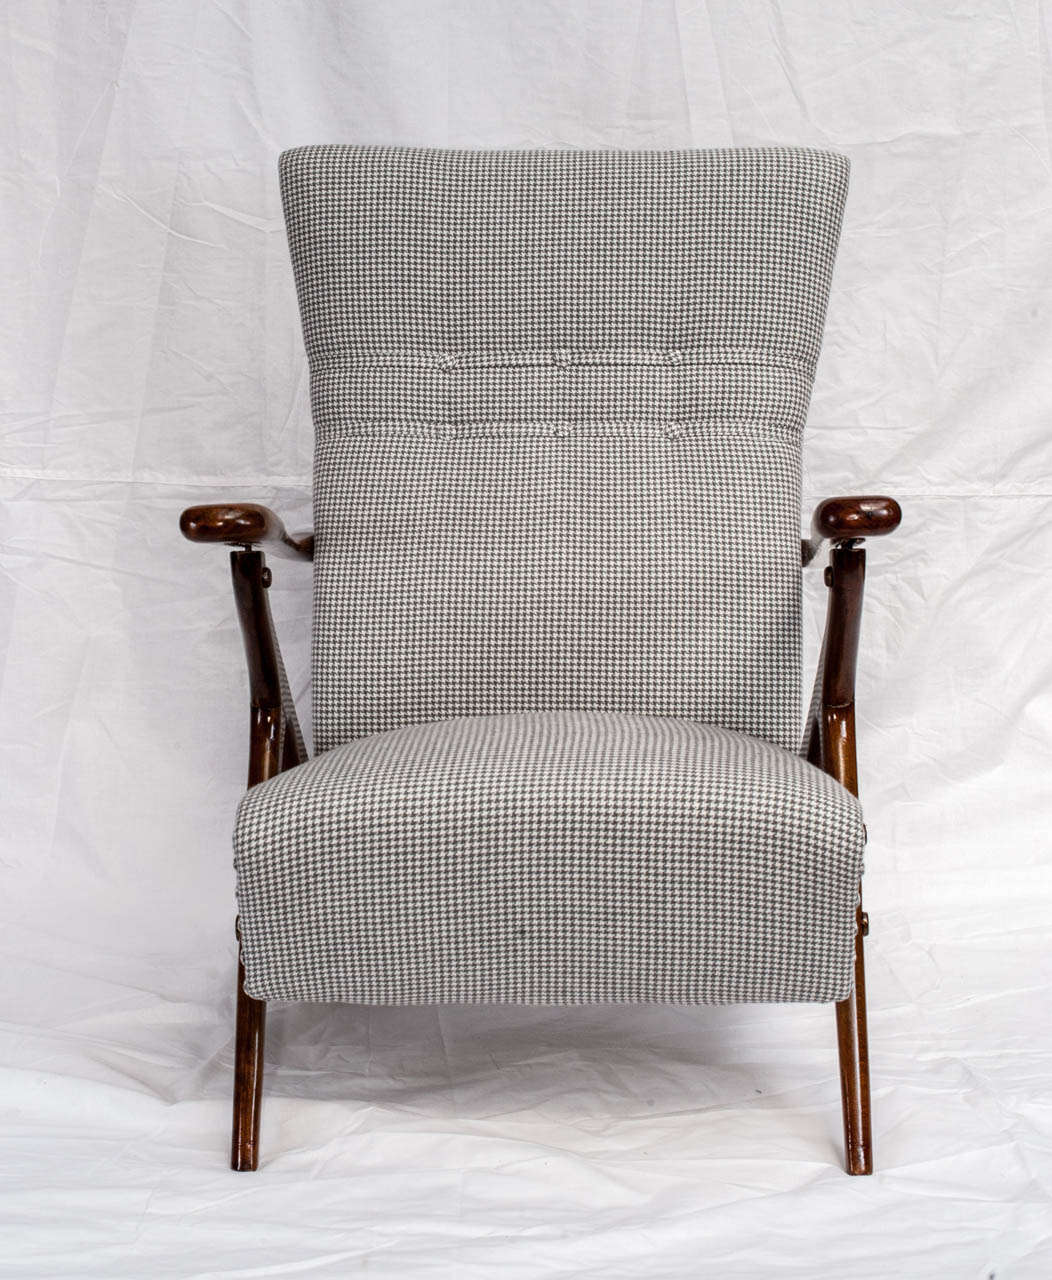 1950's Pair of Italian Armchairs 
Seat is reclining in three different positions.
Arms are mad in beech wood and the upholstery has been recently changed.